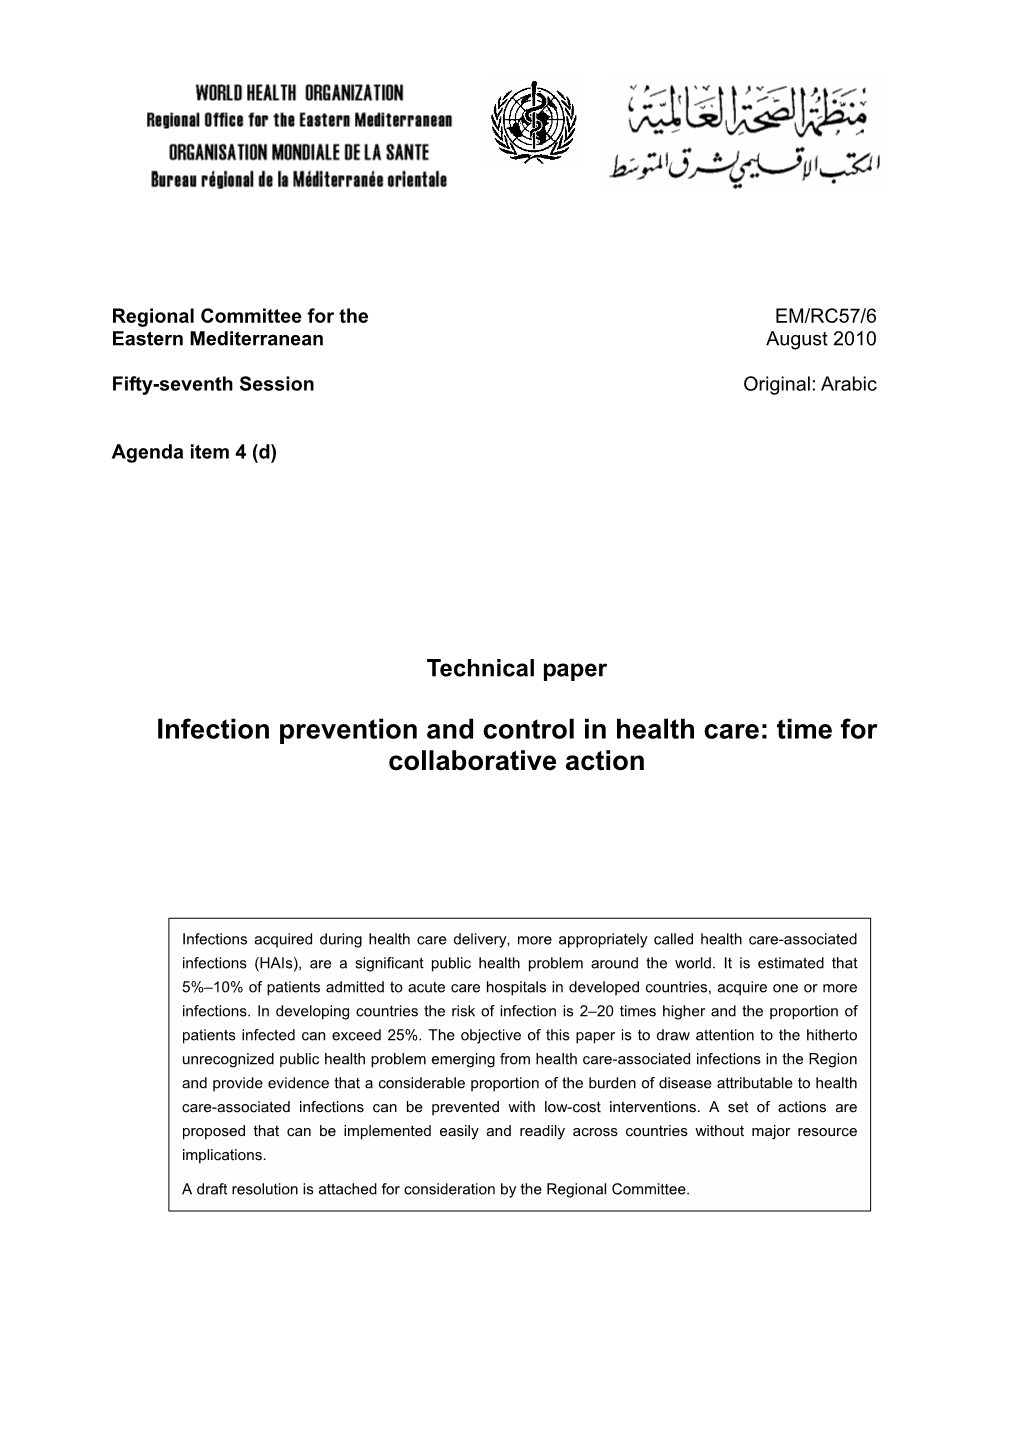 Infection Prevention and Control in Health Care: Time for Collaborative Action